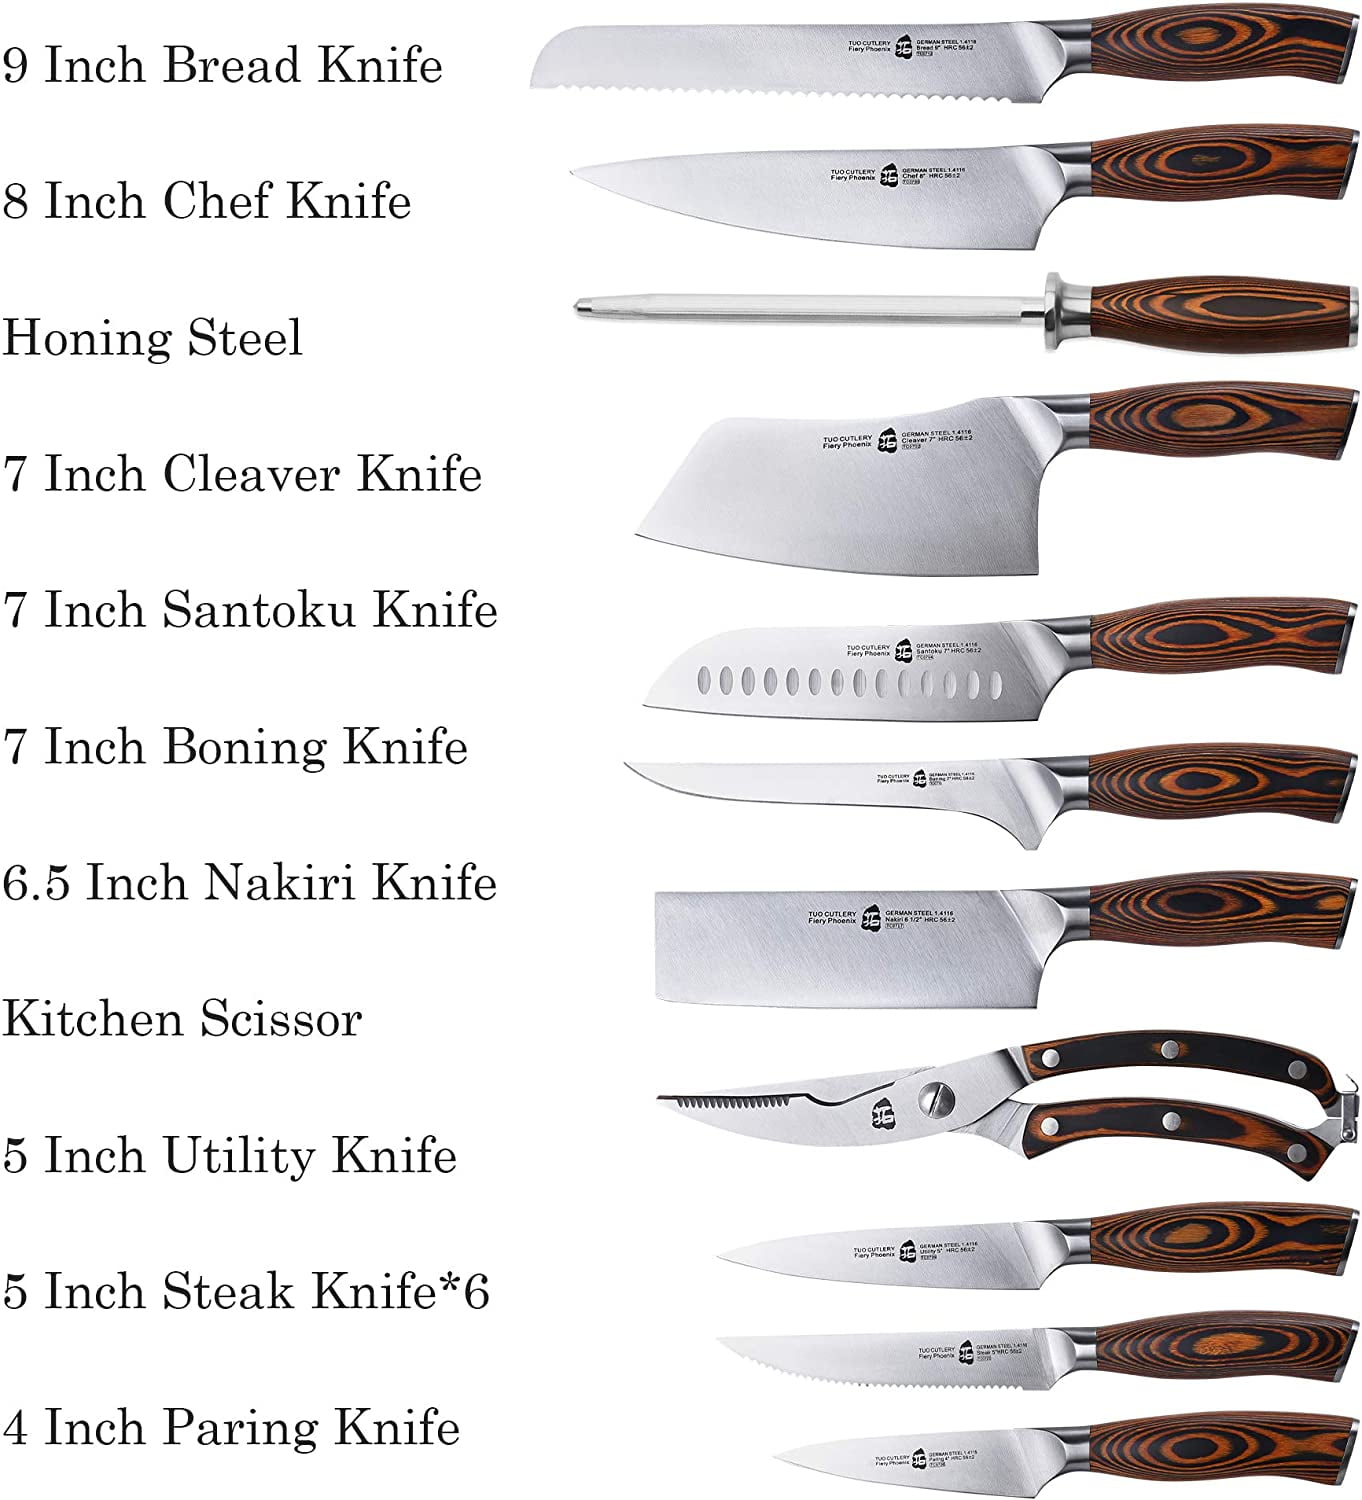 UMOGI Kitchen Knife Set 6 Piece with Sheath Covers in Gift Box - Full Tang  Wooden Handle German Stainless Steel - professional Cutlery Knives Set with